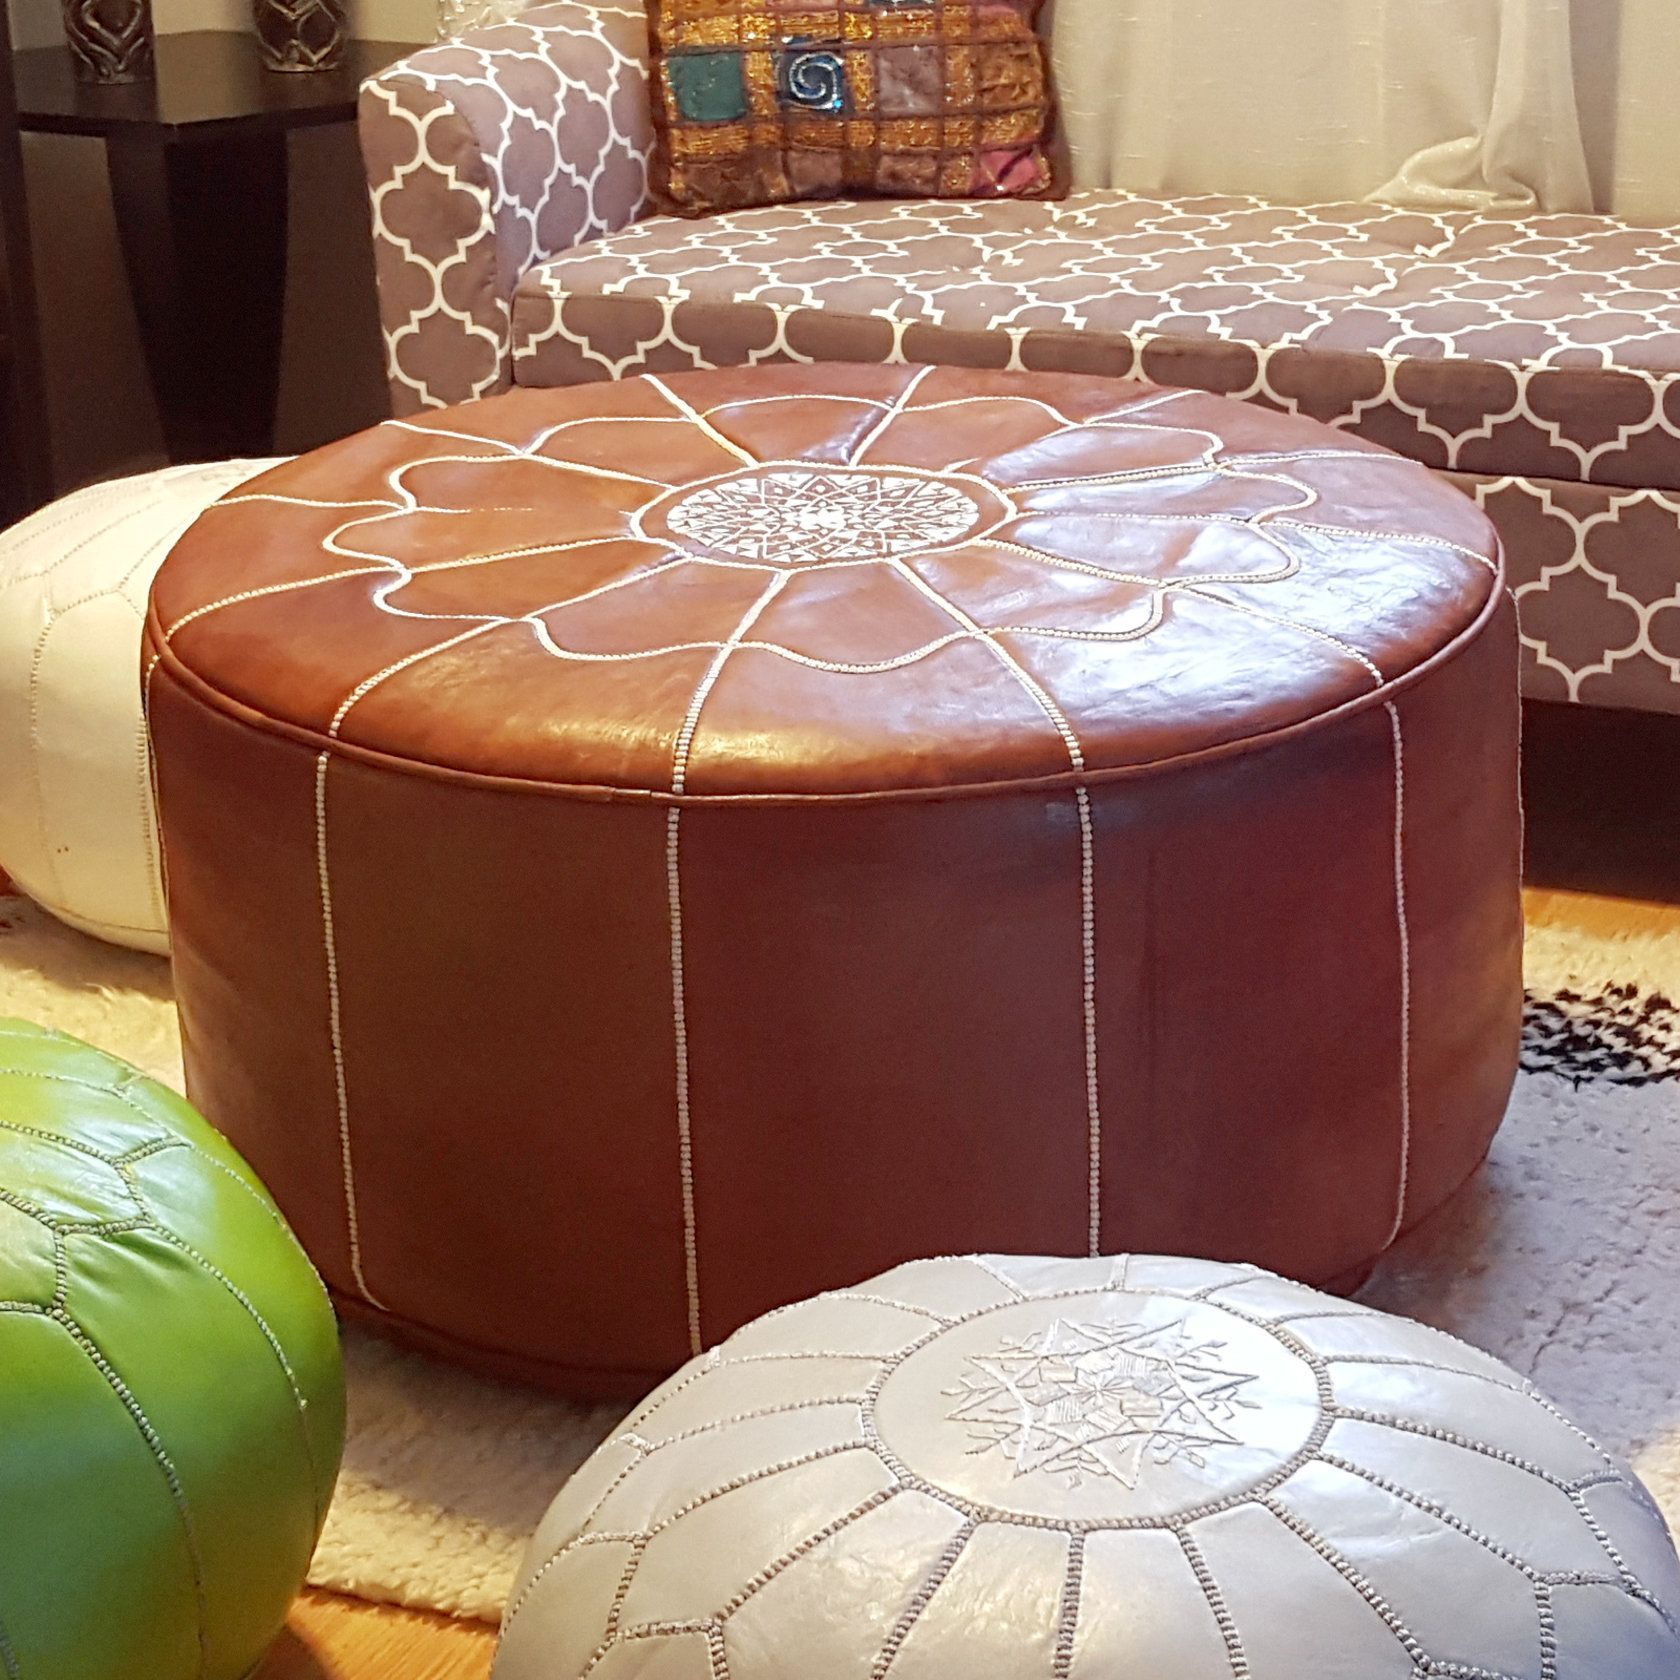 21 Lovely Leather Pouf For Your Room | Leather Pouf Ottoman, Moroccan Regarding Brown Moroccan Inspired Pouf Ottomans (View 18 of 20)